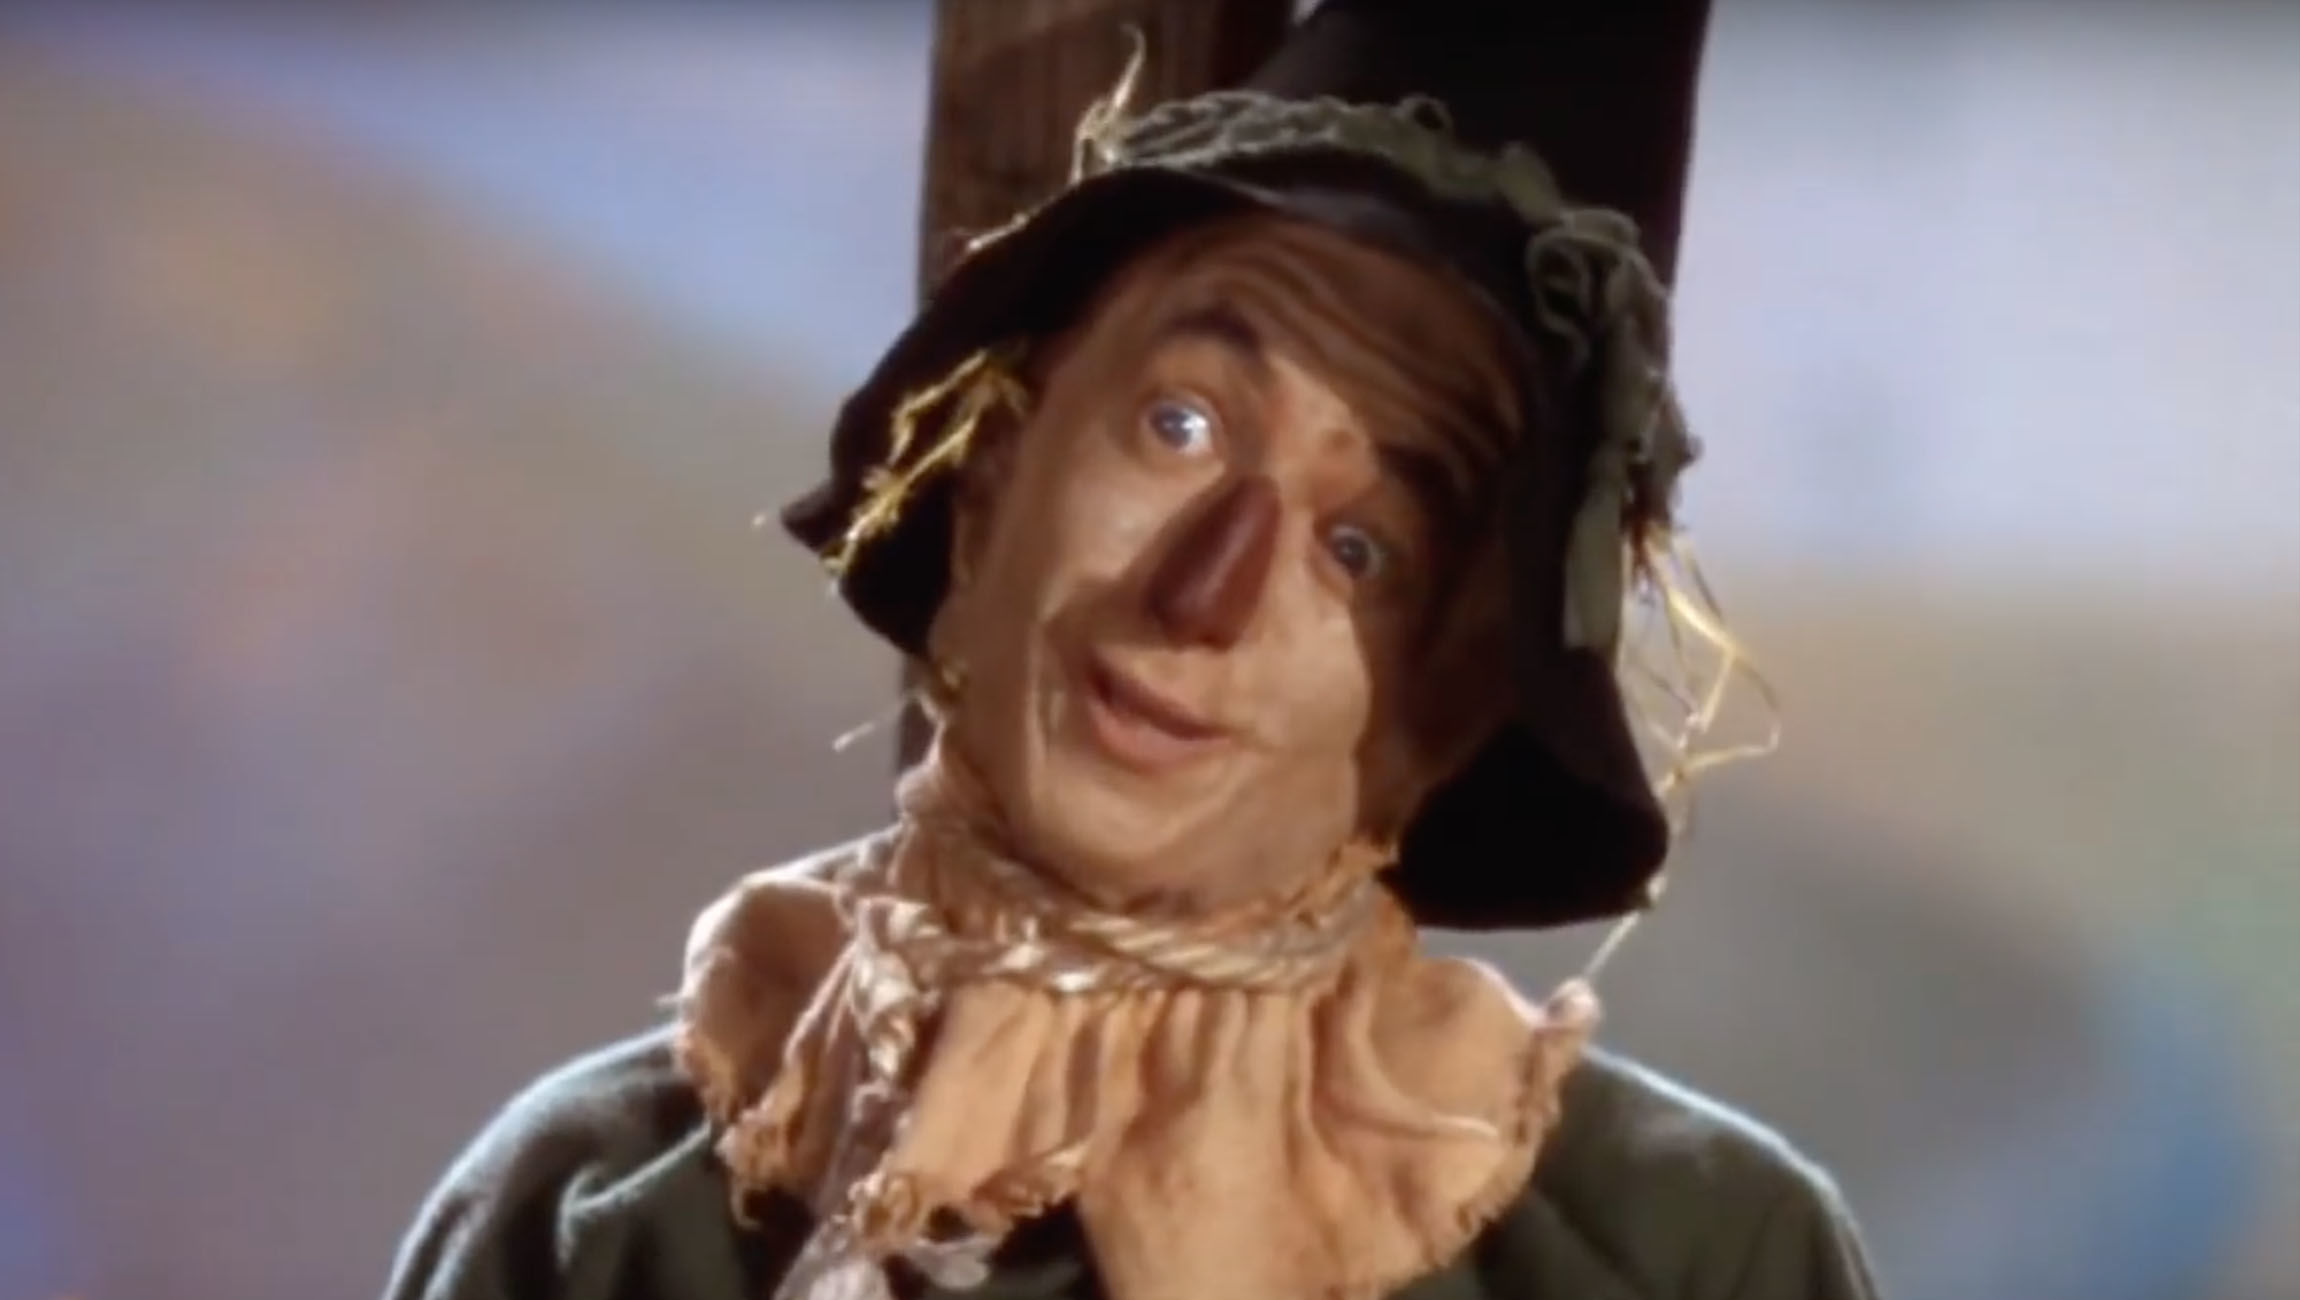 Scarecrow "If I only had a brain" Wizard of Oz